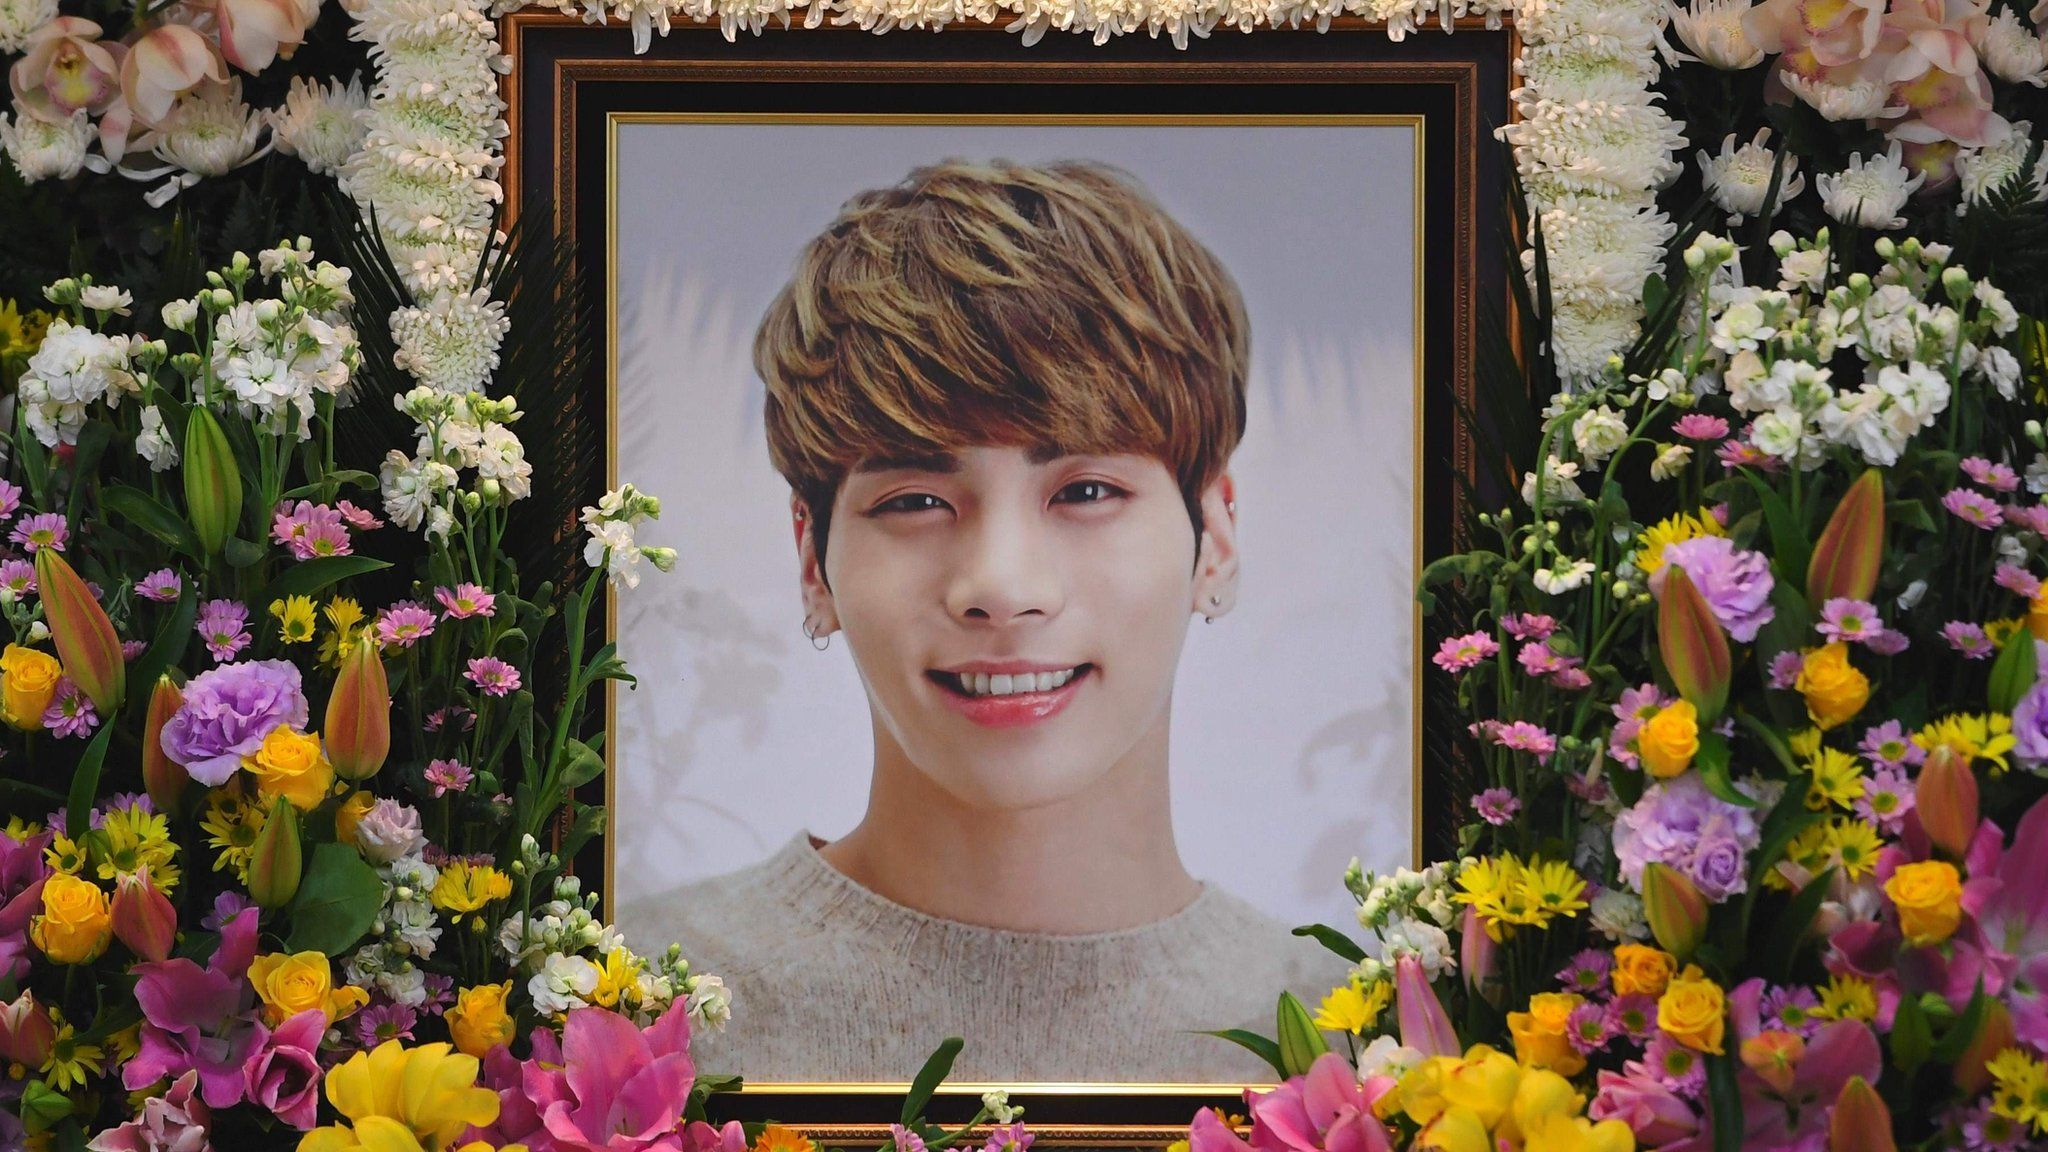 The portrait of Kim Jong-Hyun, a 27-year-old lead singer of the massively popular K-pop boyband SHINee, is seen on a mourning altar at a hospital in Seoul on 19 December 2017.